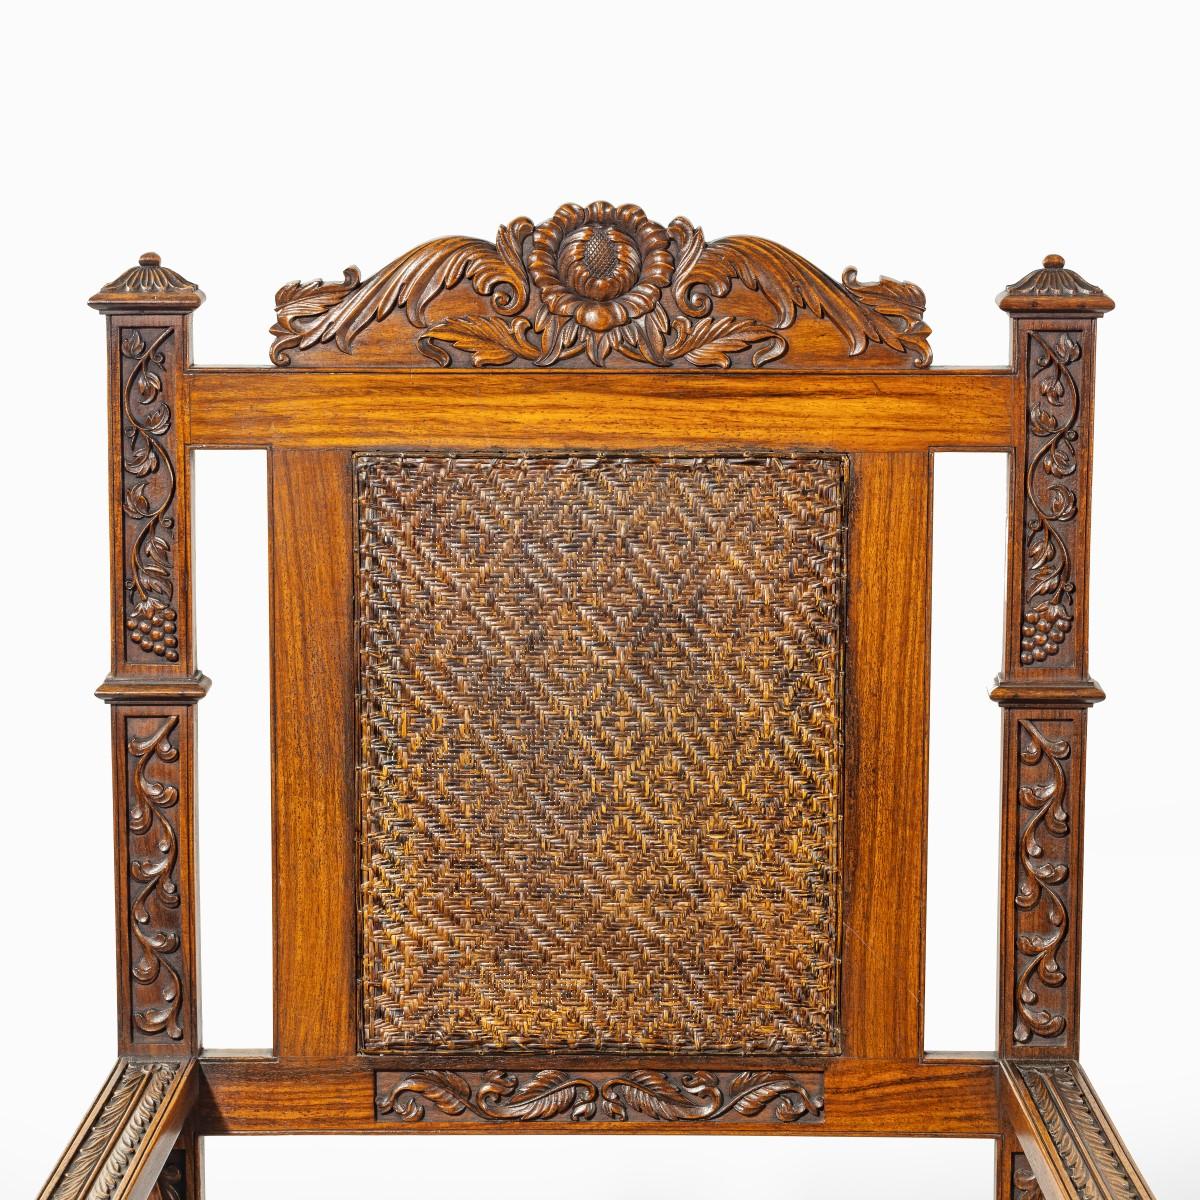 Pair of Indian Throne Chairs, Carved with the Arms of the Kingdom of Travancor 1